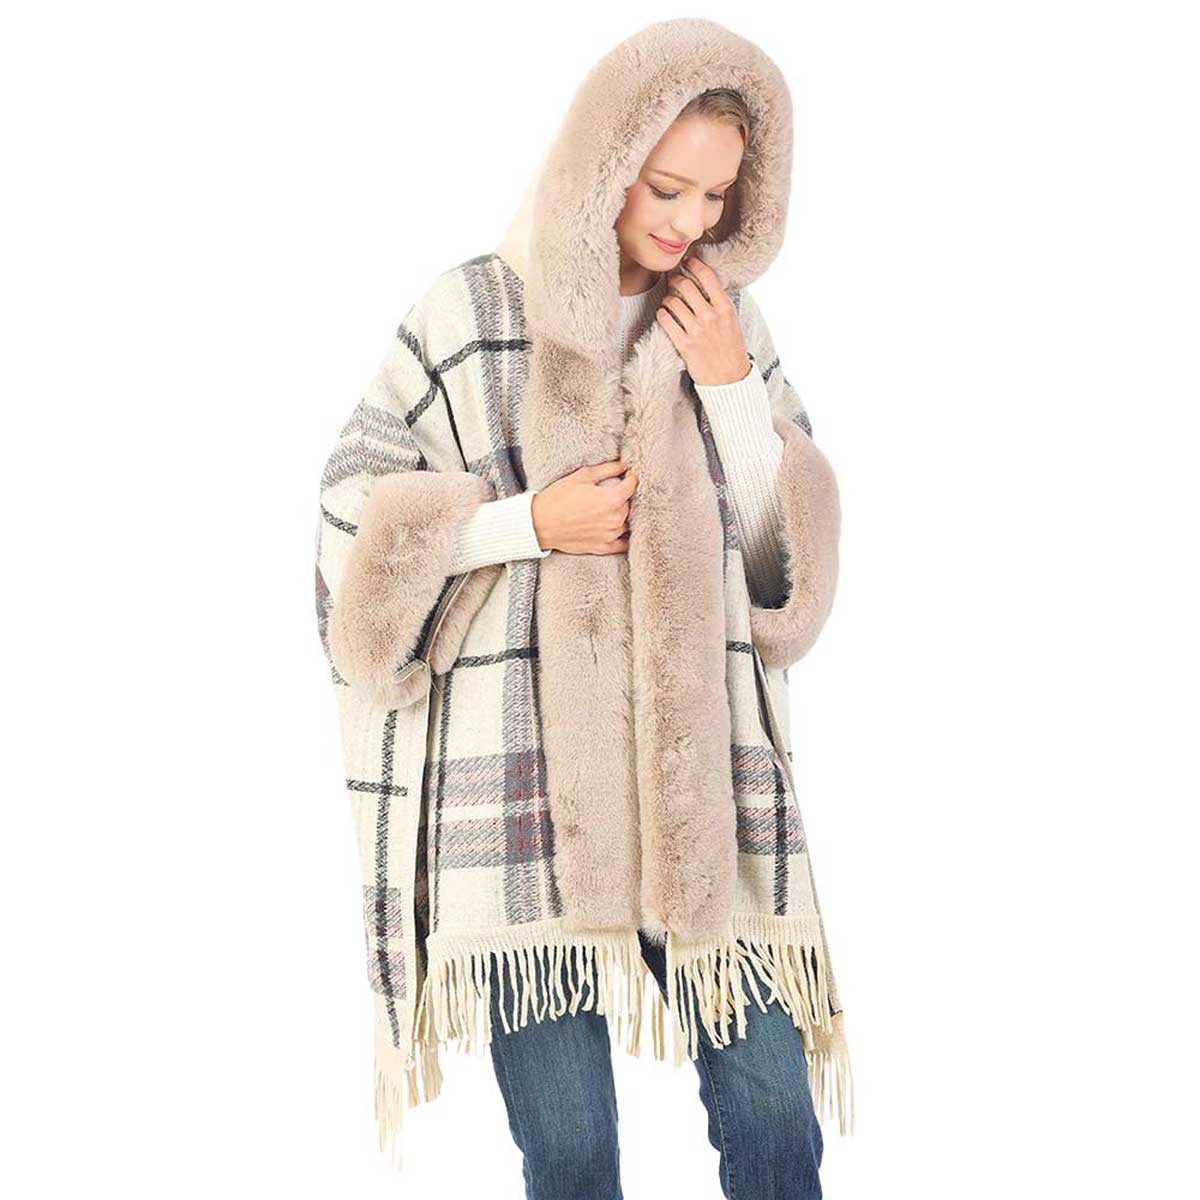 Beige Plaid Pattern With Solid Faux Fur Trim Edge, is the perfect representation of beauty and comfortability for this winter. It will surely make you stand out with its beautiful color variation. It goes with every winter outfit and gives you a unique yet beautiful outlook everywhere. It ensures your upper body keeps perfectly toasty when the temperatures drop. You can throw it on over so many pieces elevating any casual outfit!